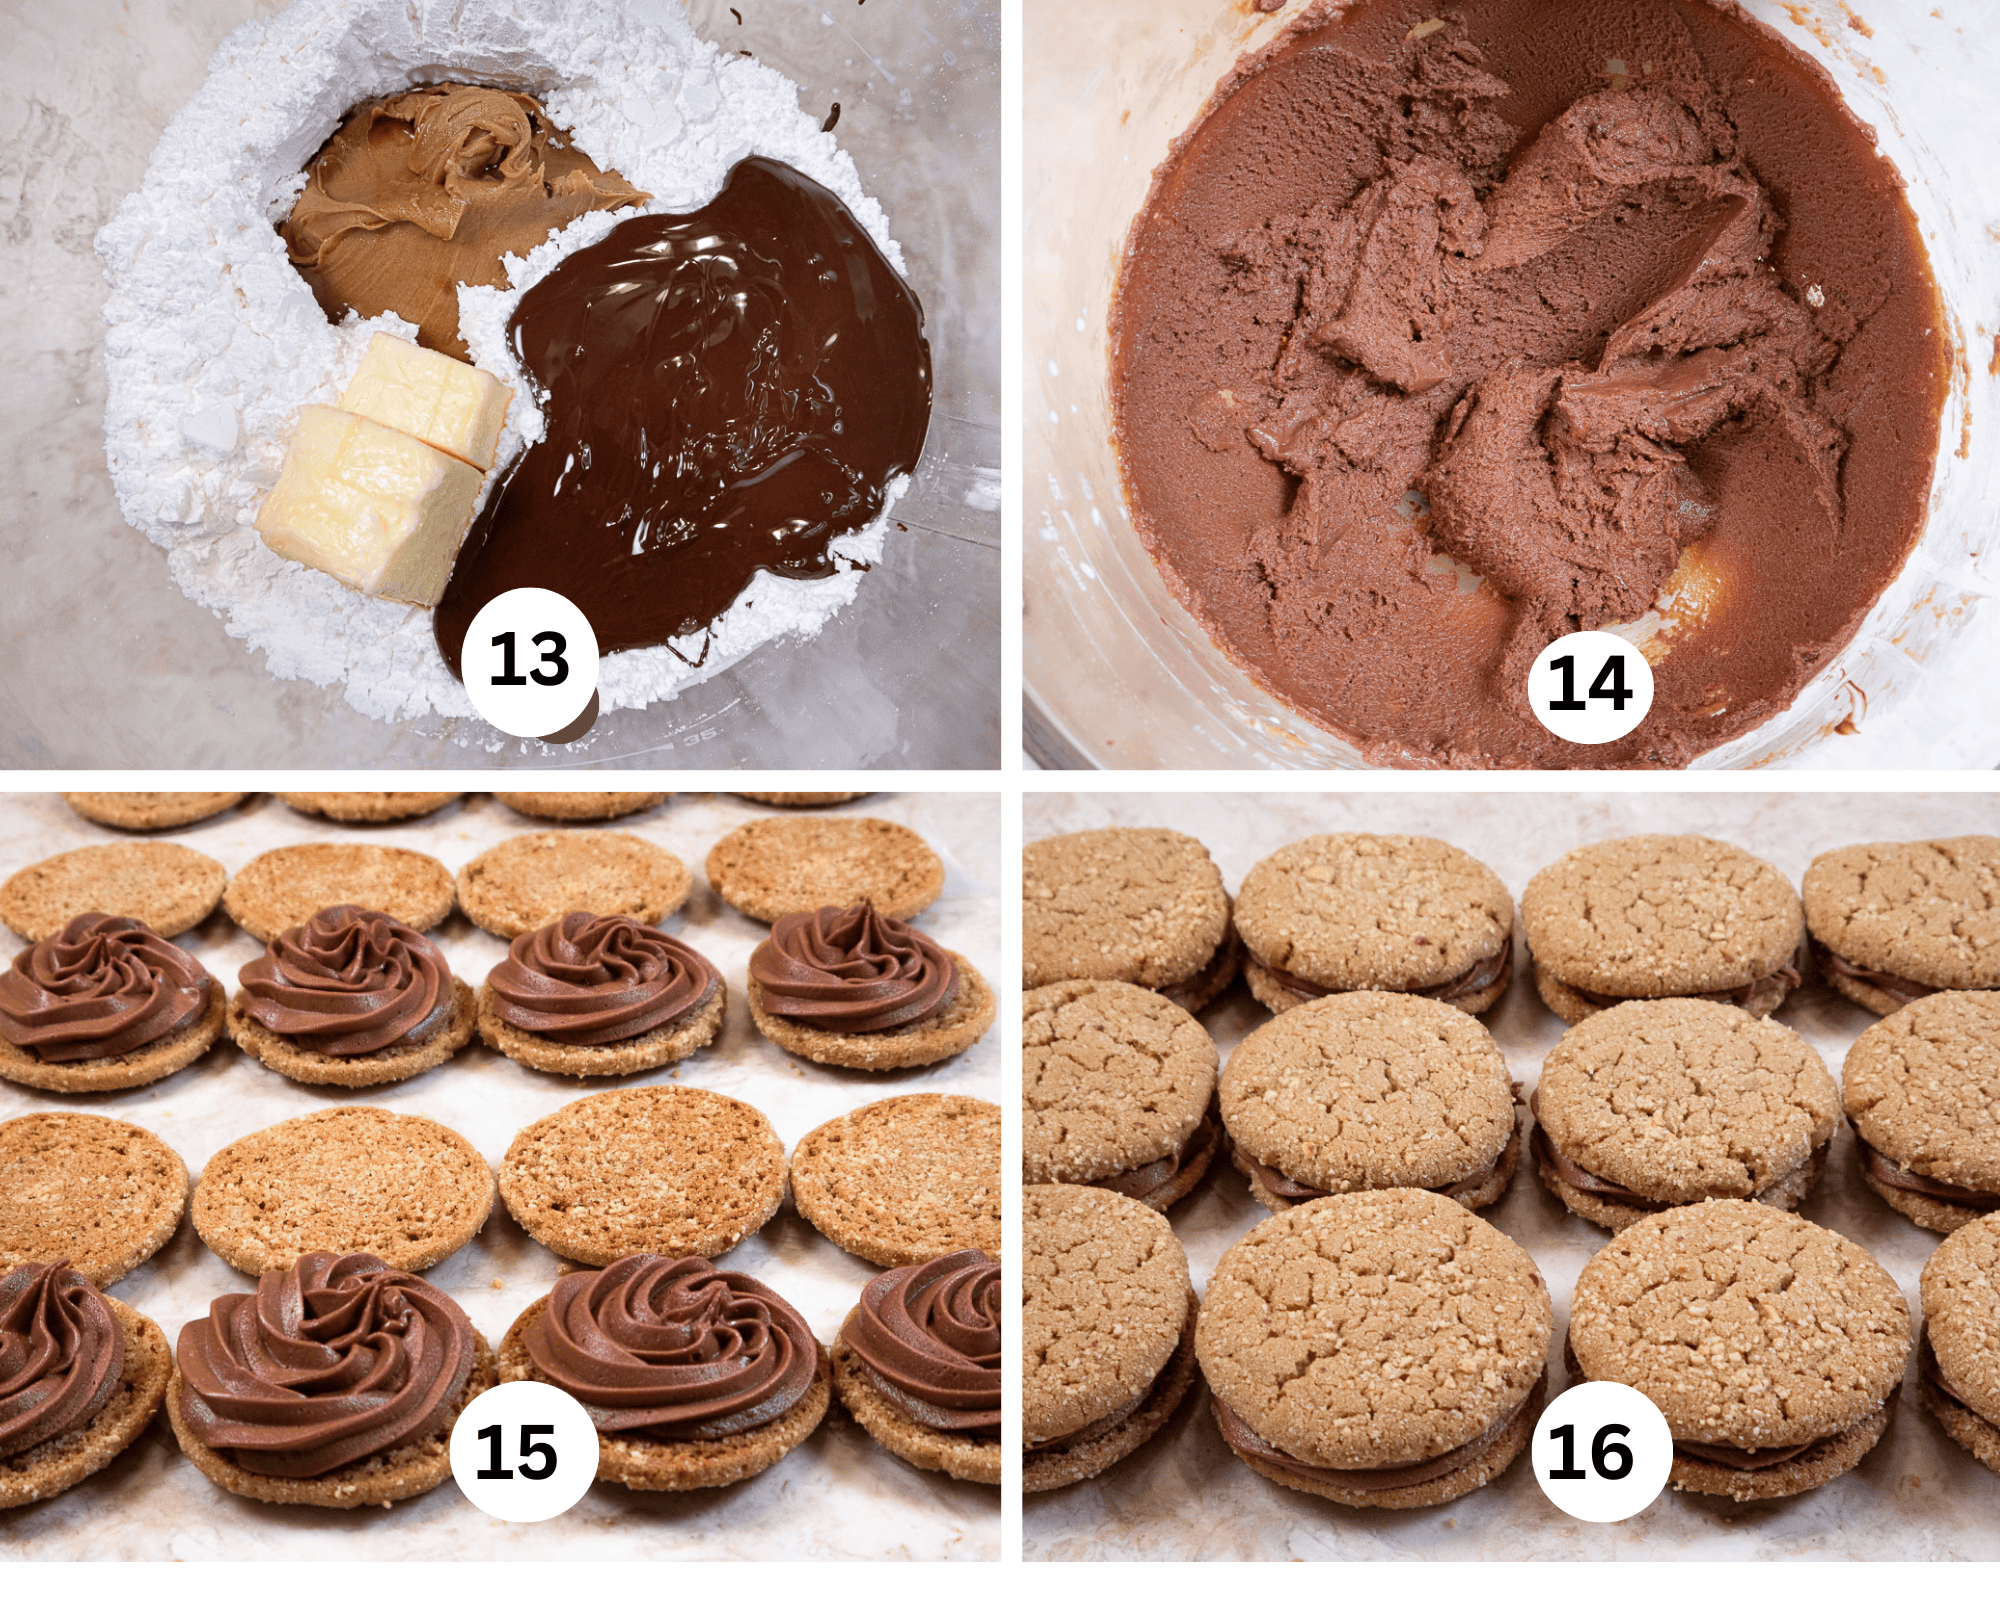 The fina collage shows
the ingrediets for the filling in the mixing bowl, the filling mixed, the filling piped on and the cookies sandwiched. 